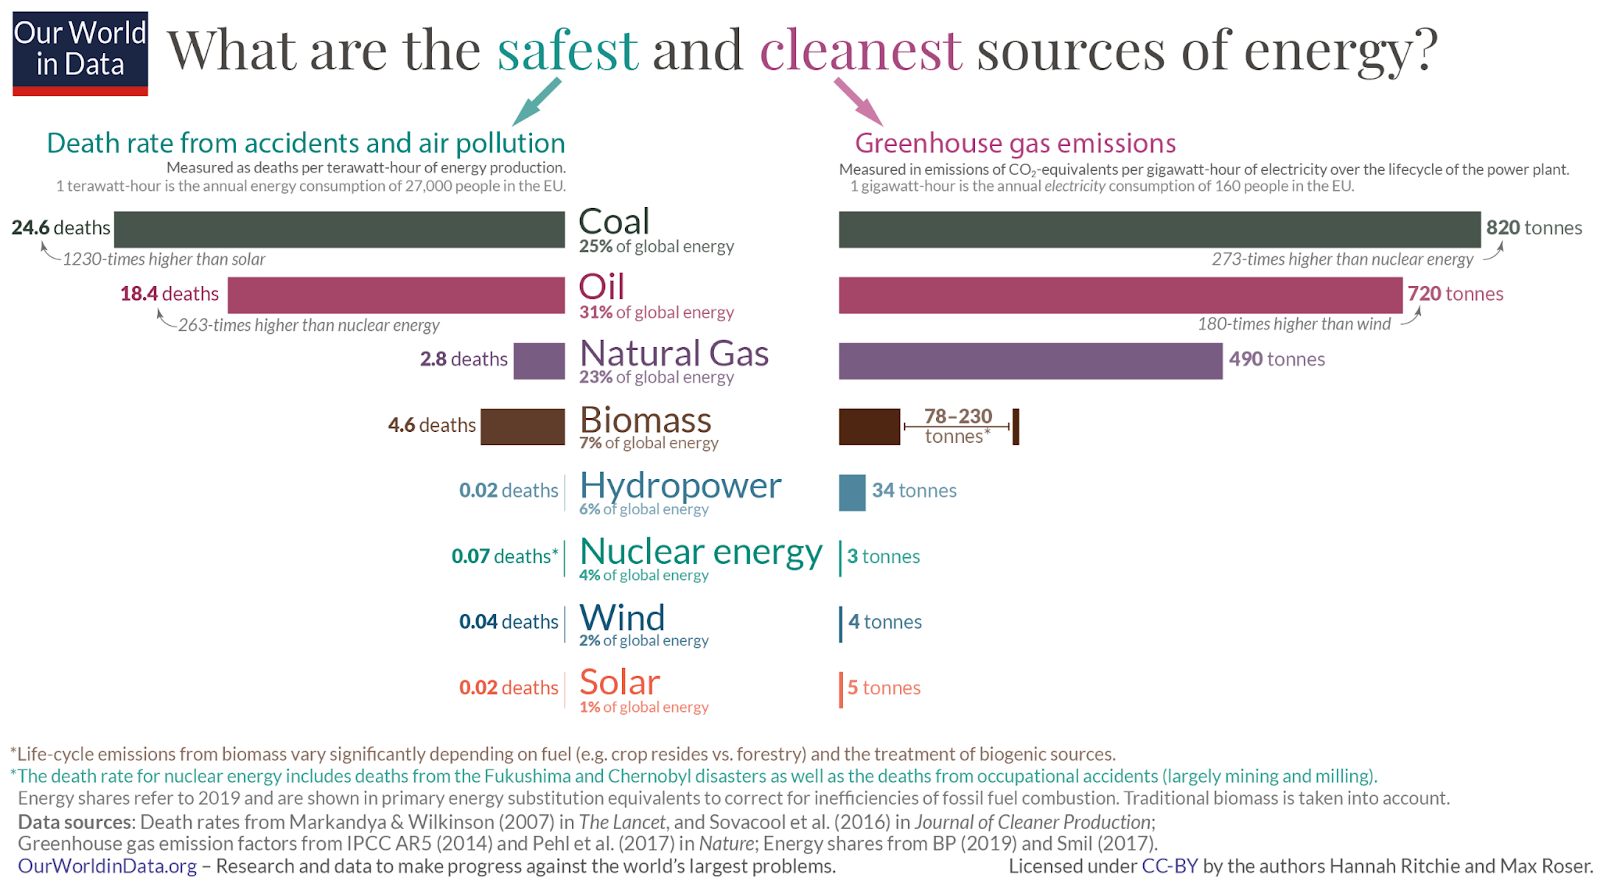 Chart ranking energy sources based on how safe and clean they are.